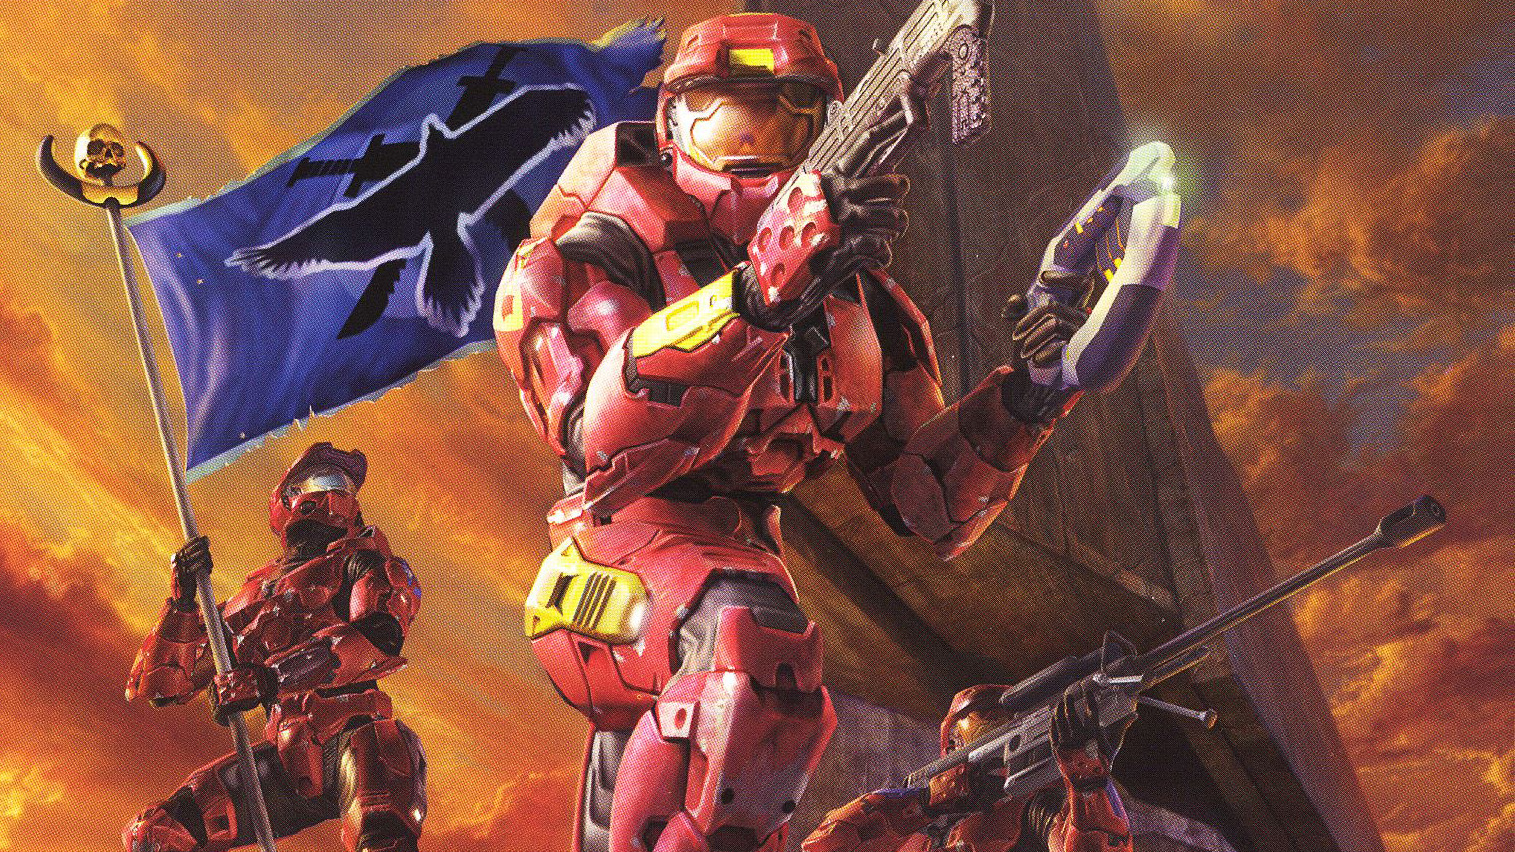 Halo Multiplayer Modes Ranked From Worst to Best | Gameverse